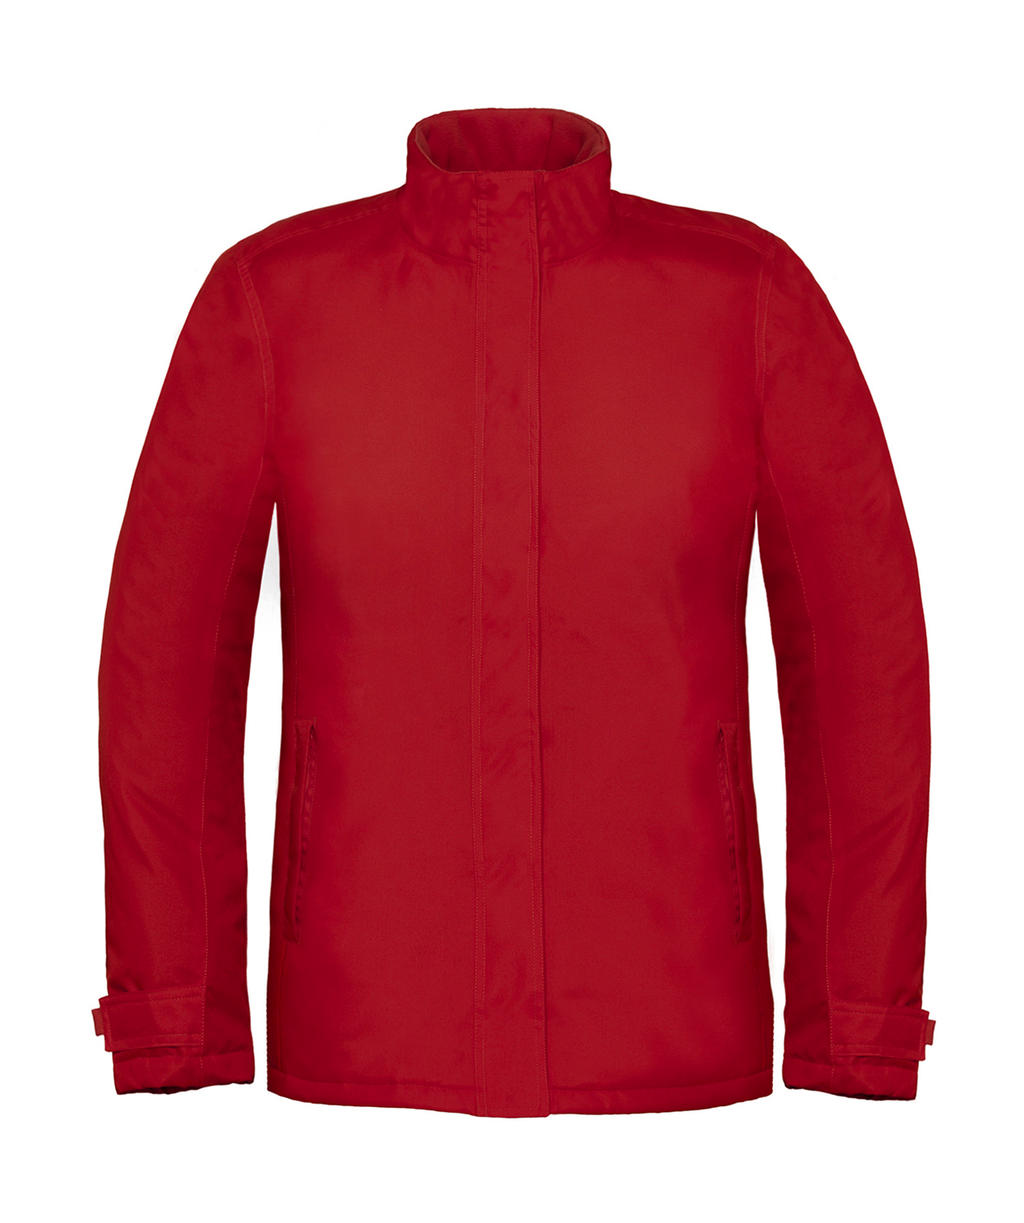  Real+/women Heavy Weight Jacket in Farbe Deep Red